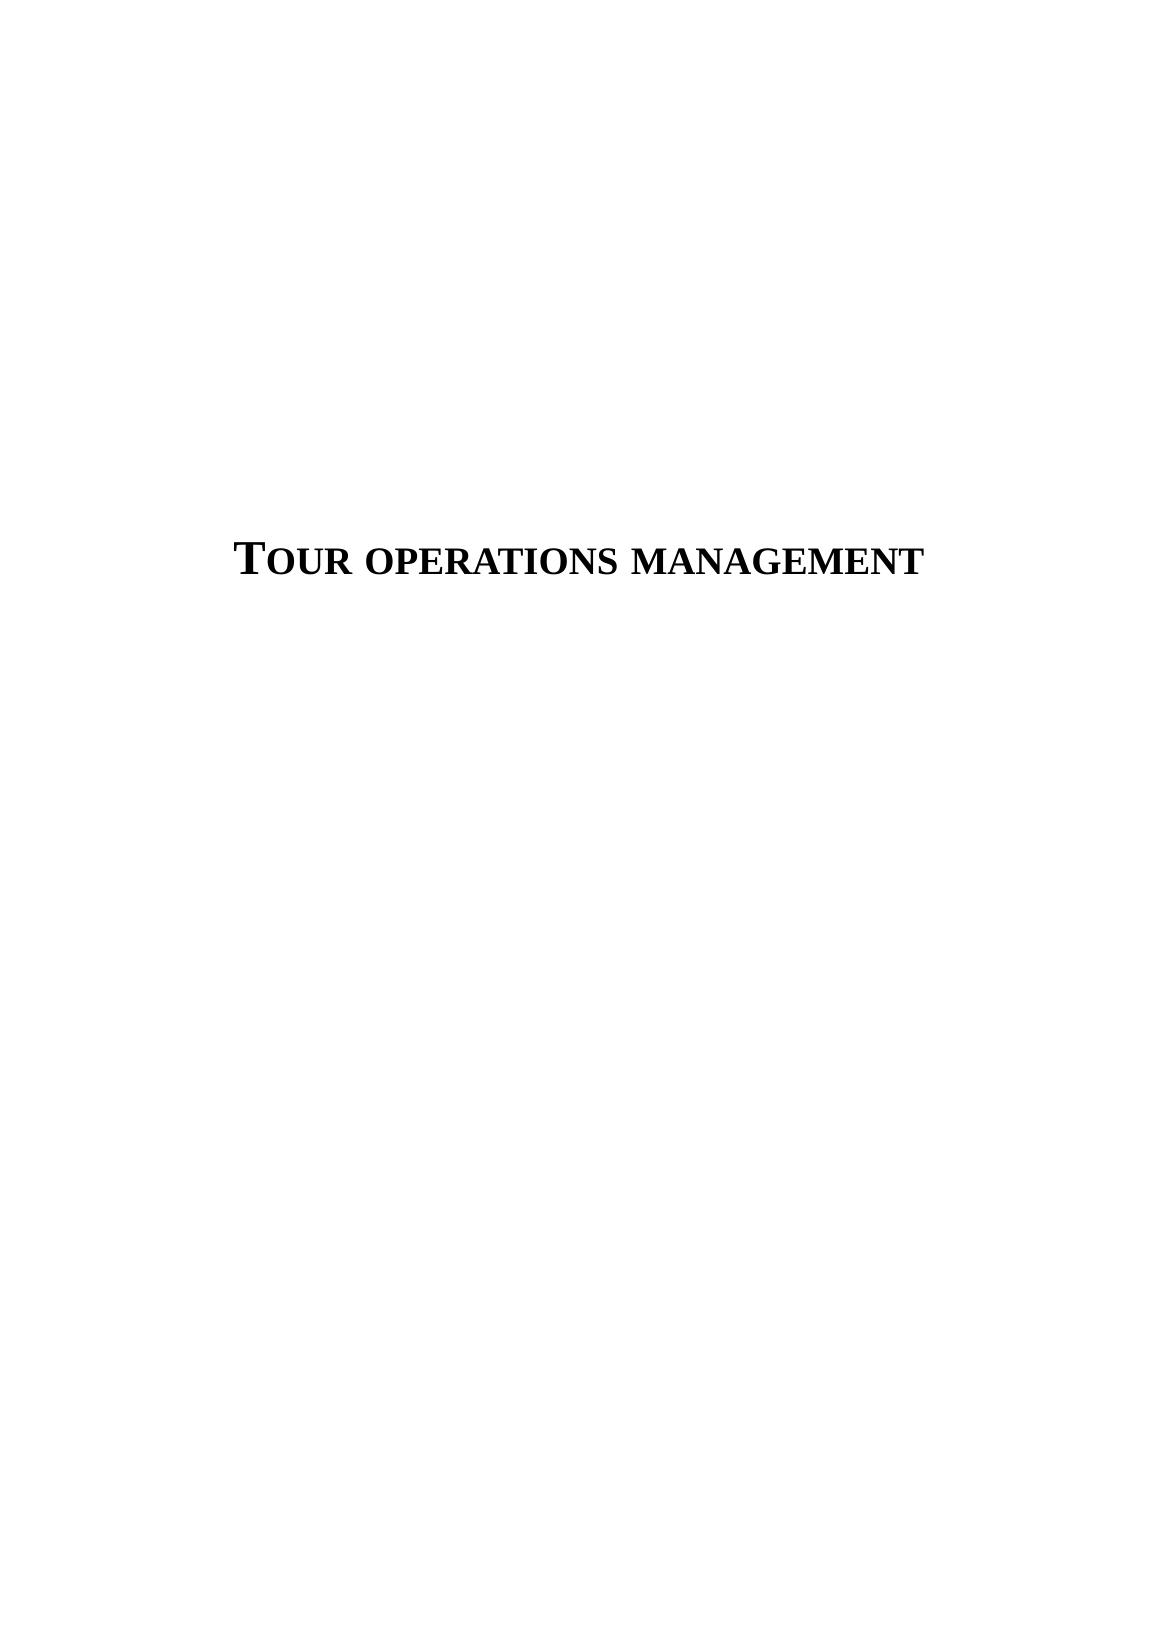 Tour Operations Management of Thomas Cook_1